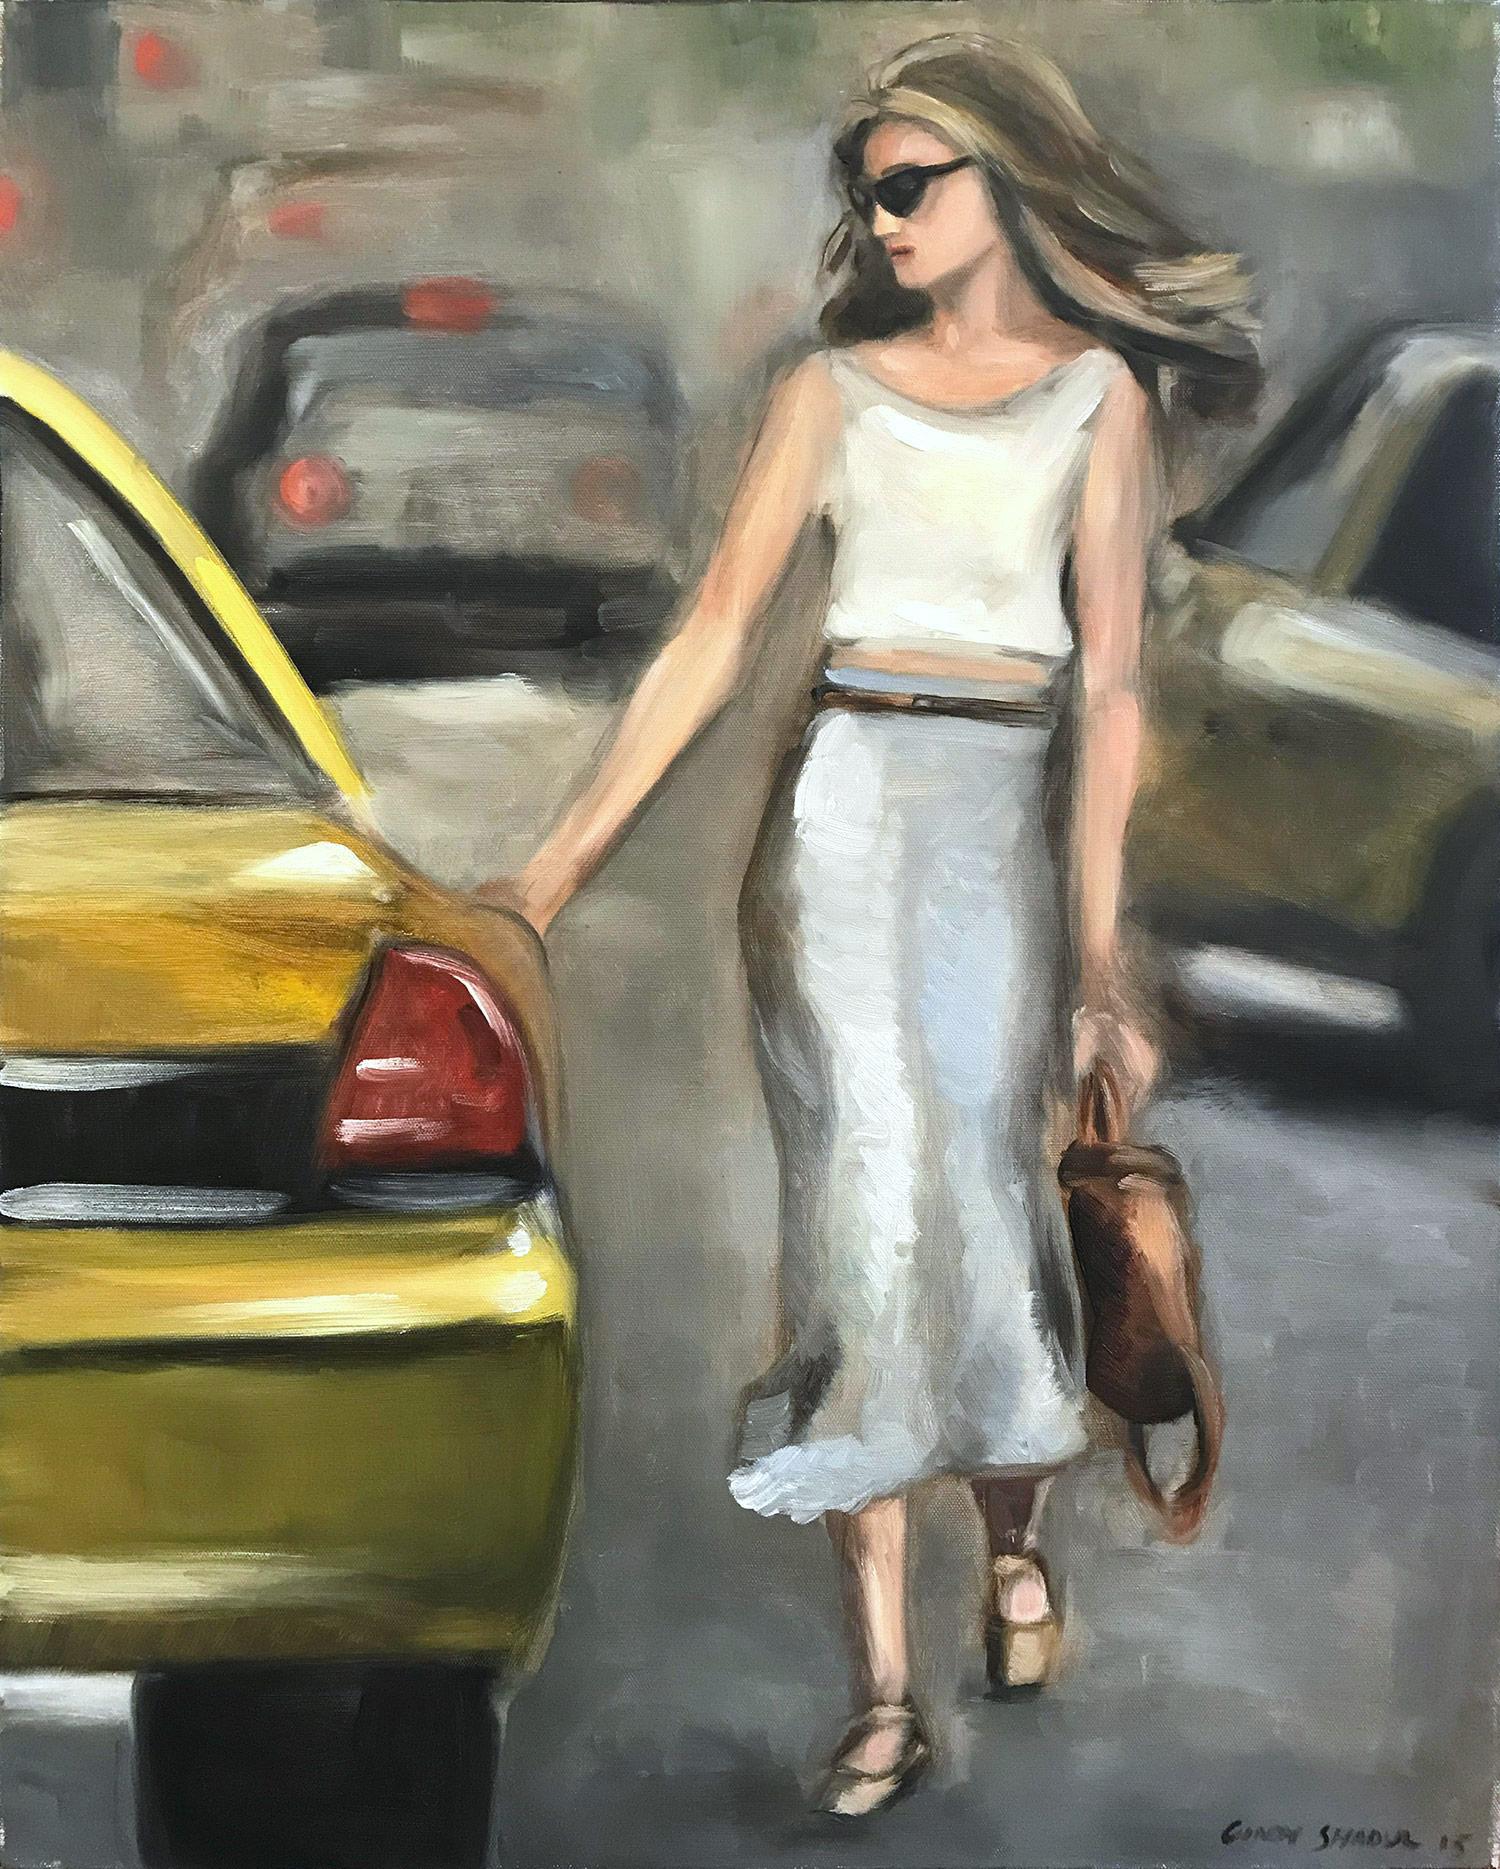 Cindy Shaoul Landscape Painting - "Stepping Out - New York" Impressionistic Street Scene Oil  Painting on Canvas